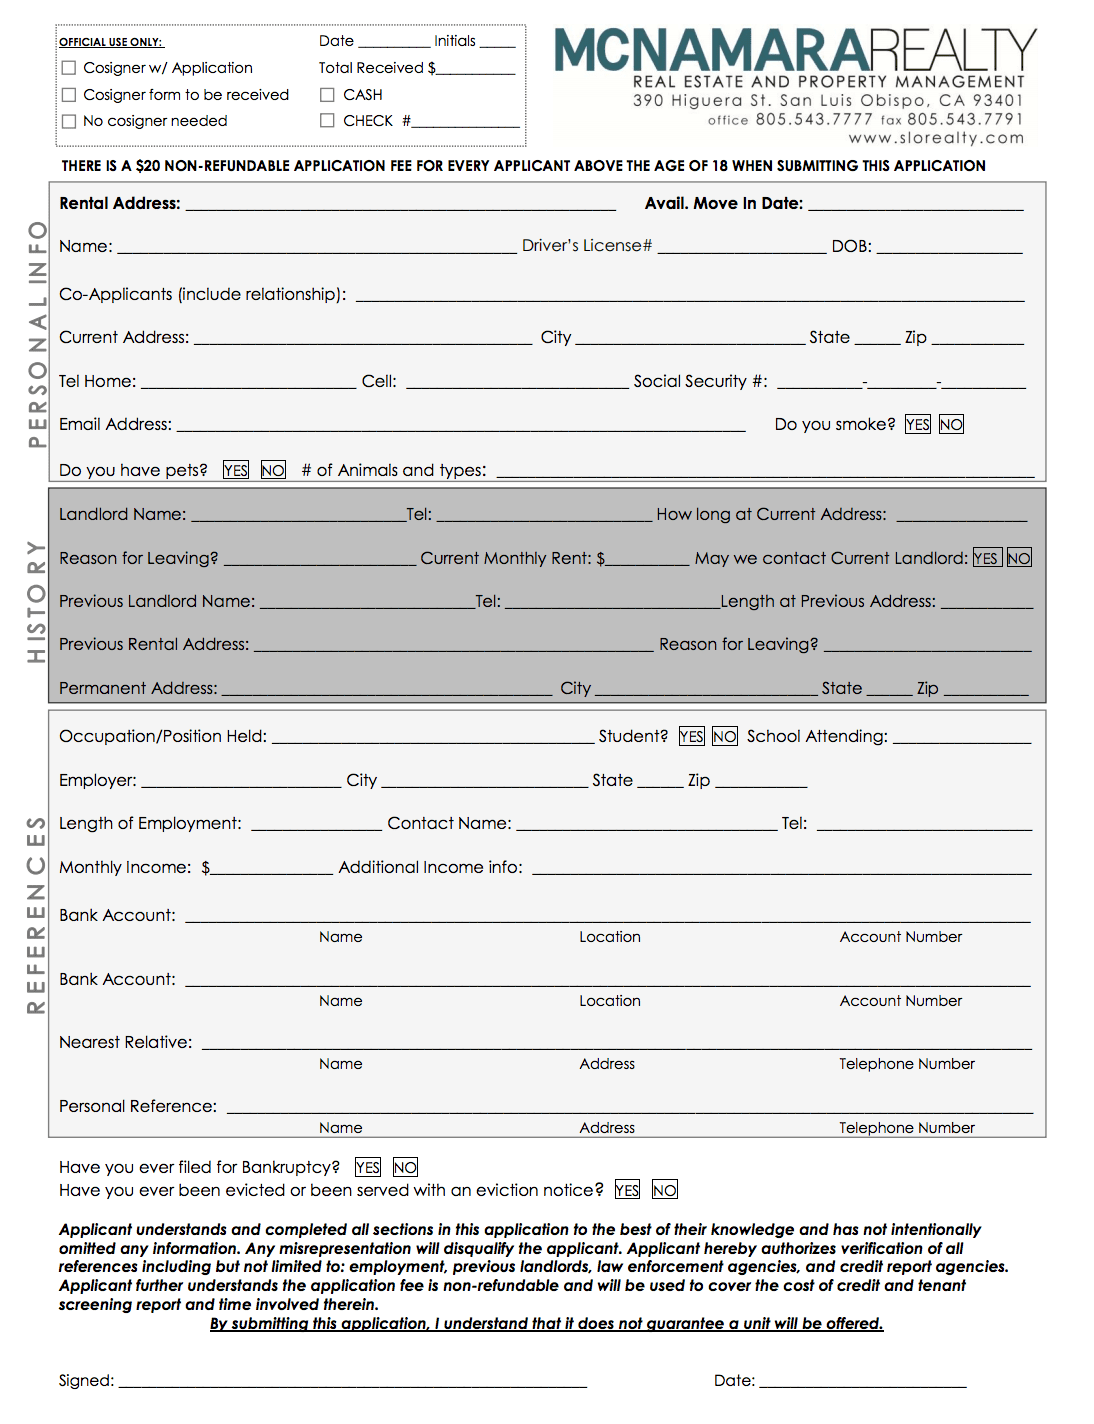 Example Rental Application